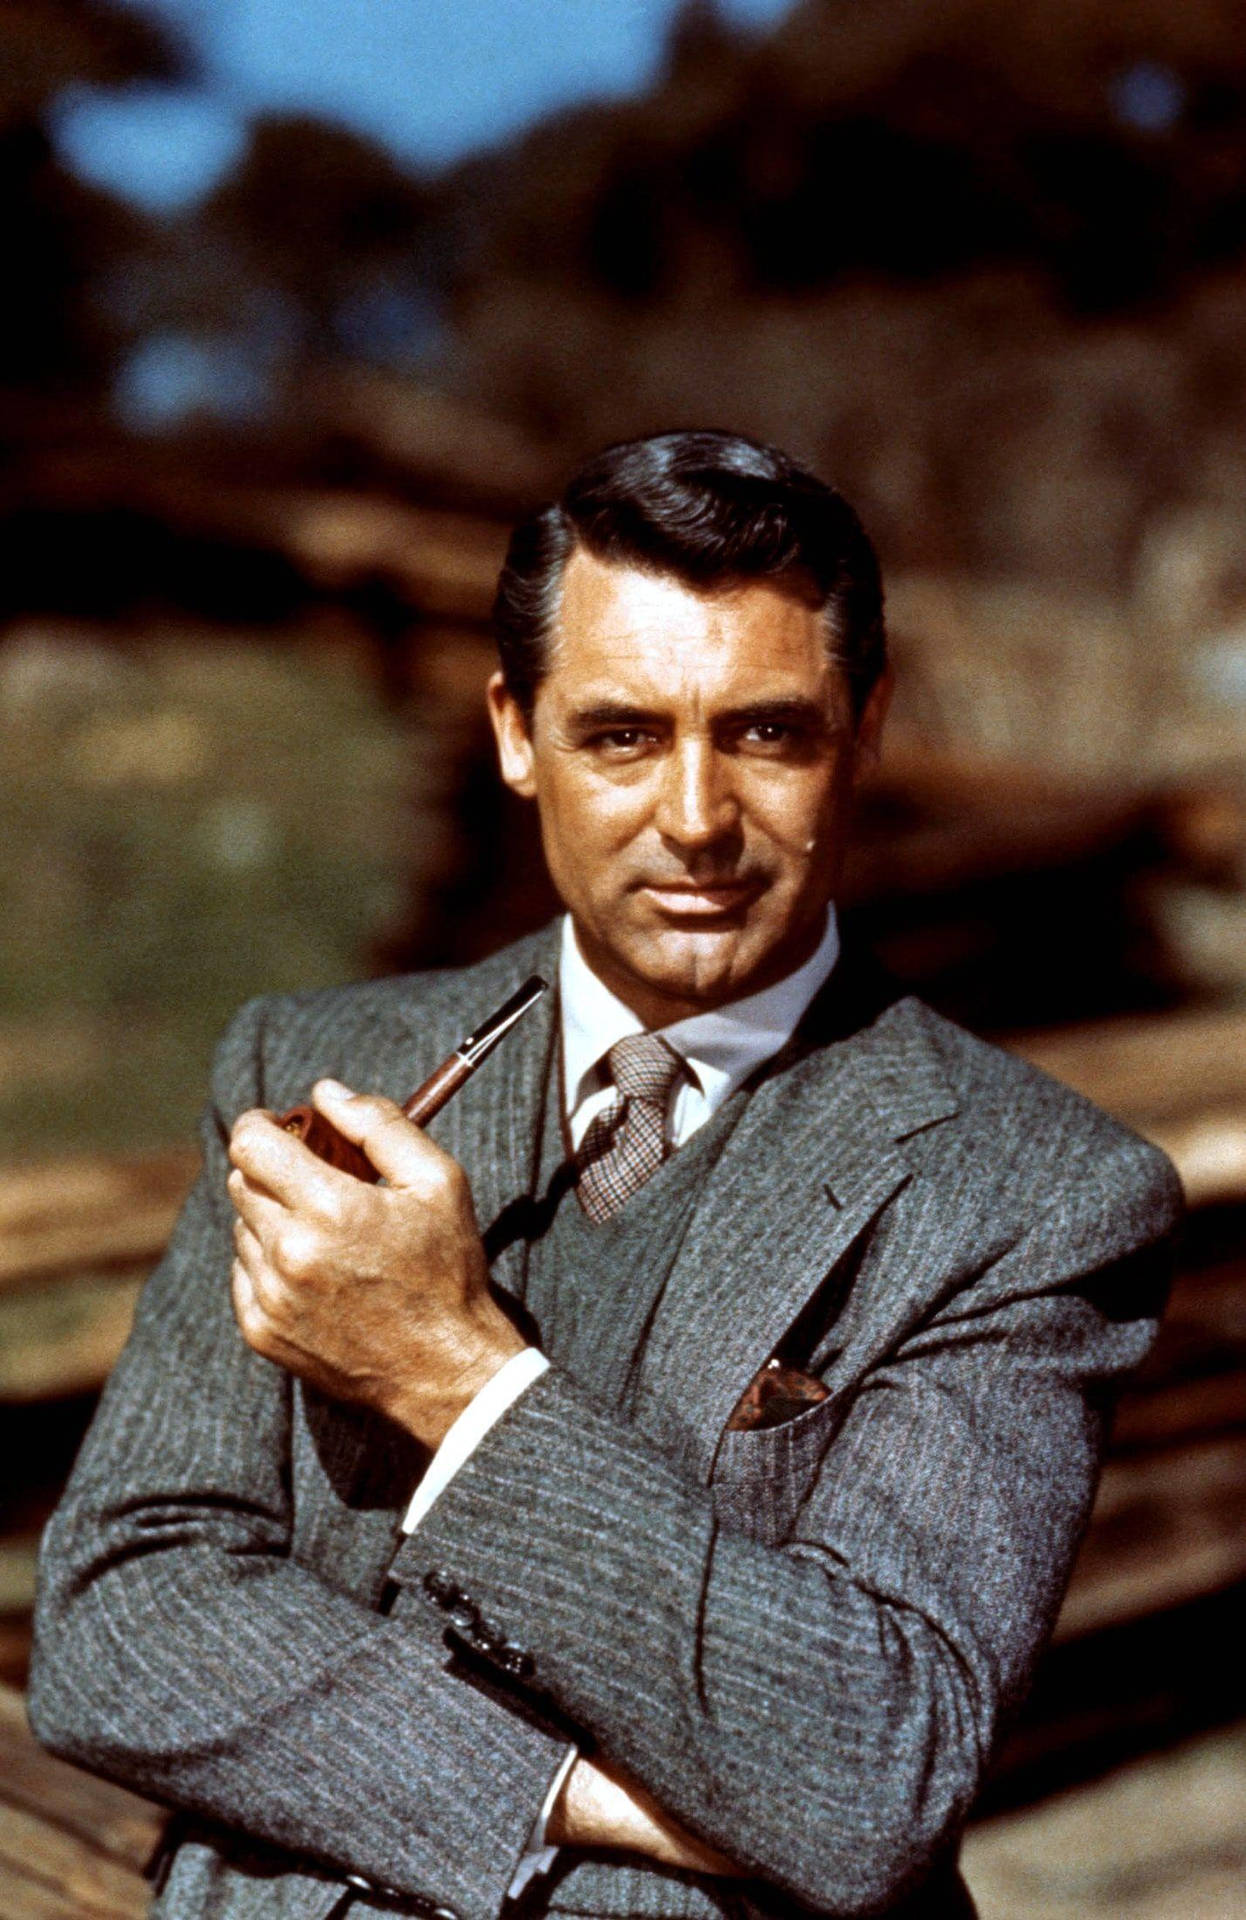 Hollywood Legend Cary Grant